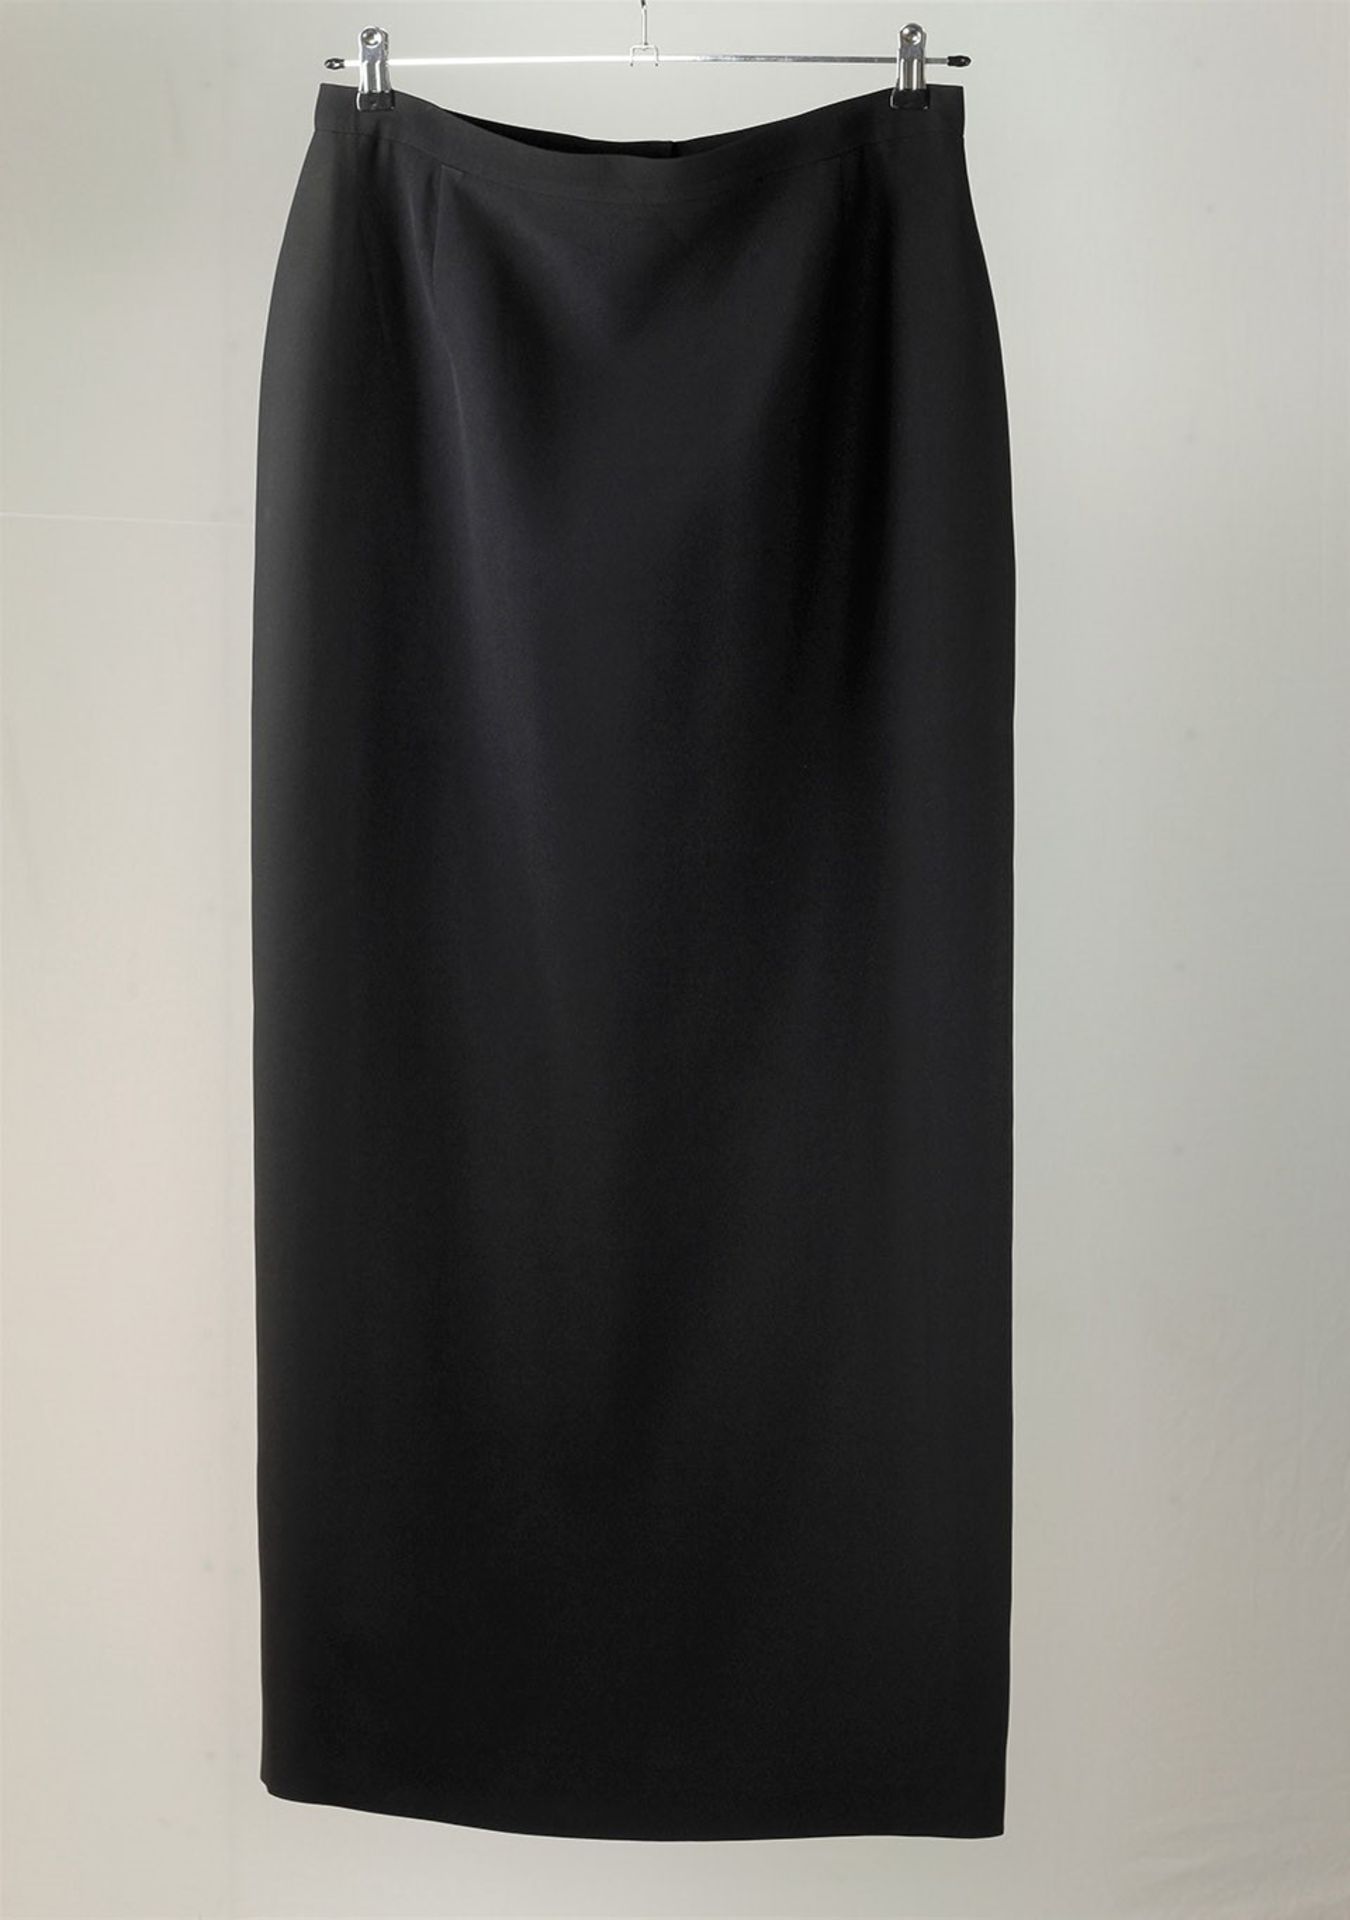 1 x Boutique Le Duc Black Maxi Pencil Skirt - From a High End Clothing Boutique In The - Image 3 of 3